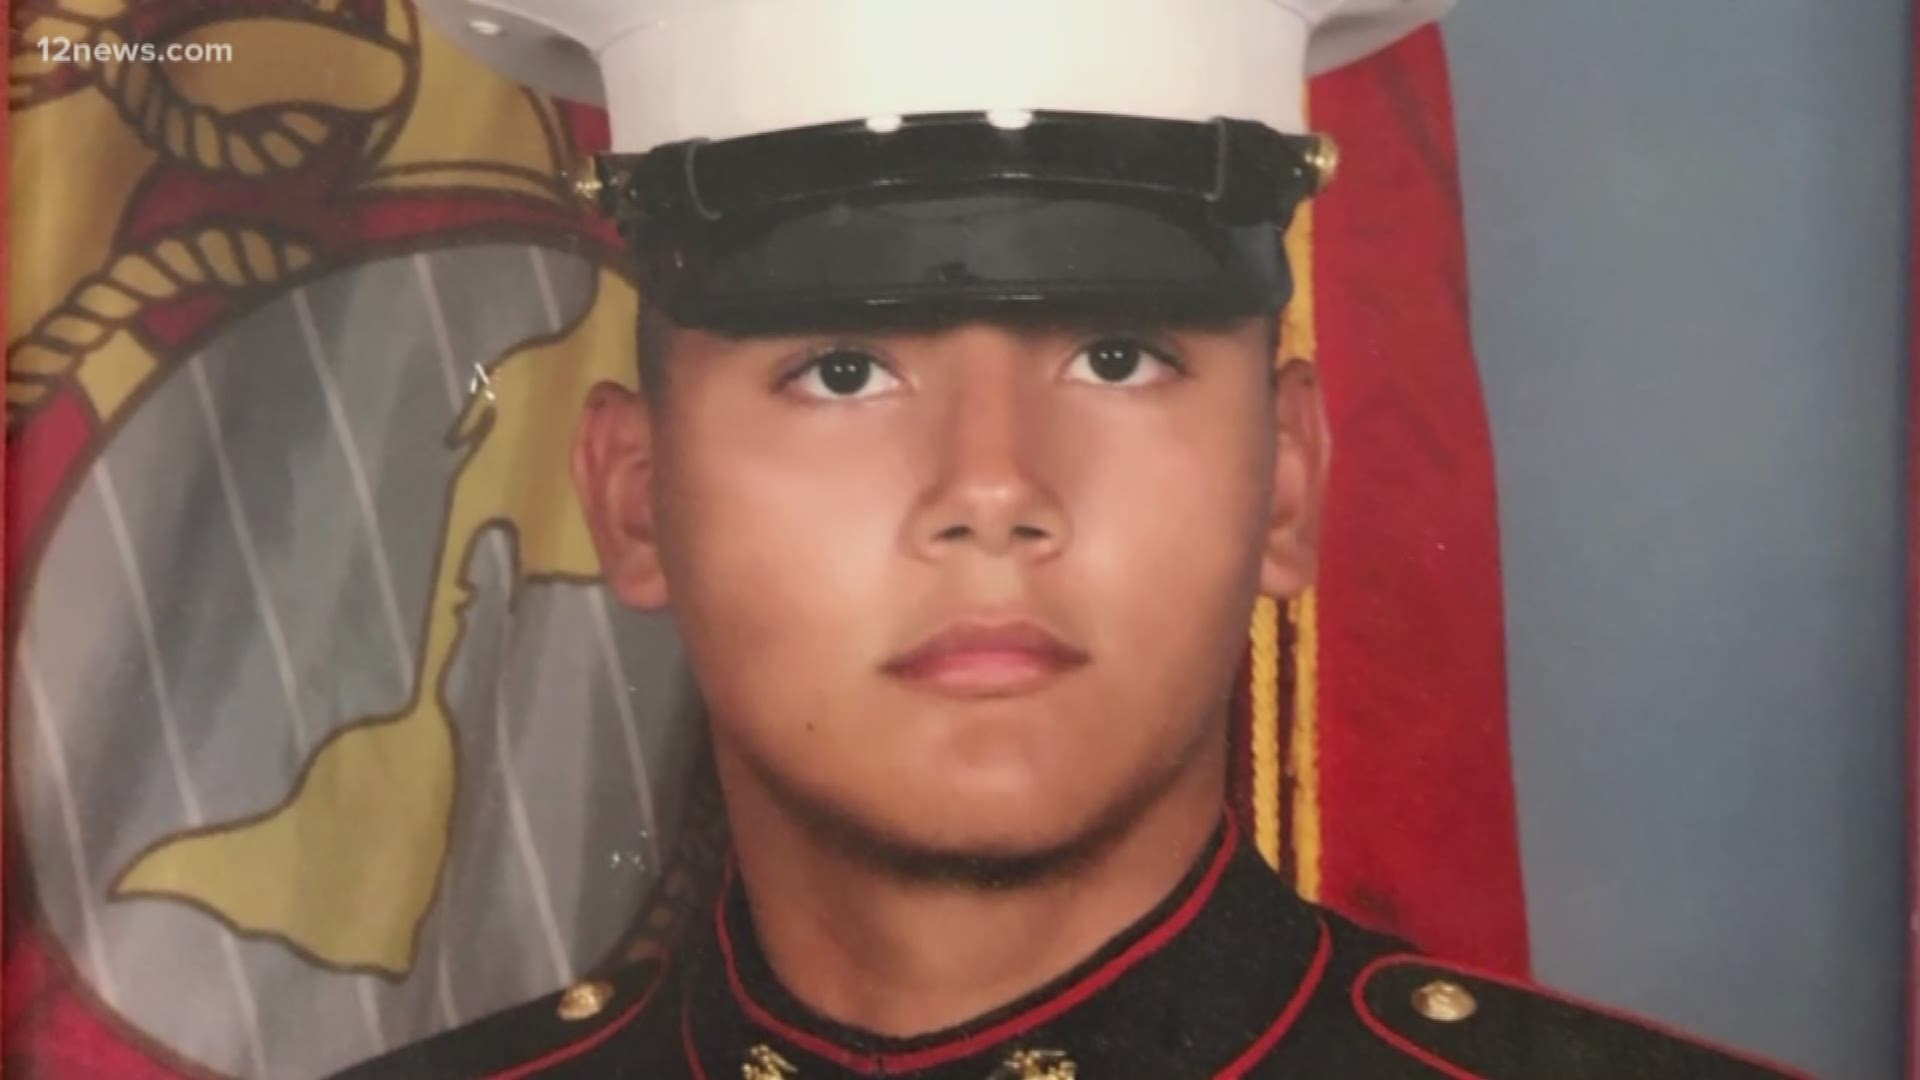 A fallen Valley hero, Sgt. Maximo Flores, has returned home to his heartbroken family. Sgt. Flores was killed when two military planes crashed mid-air off the coast of Japan in December. His remains were found just a few weeks ago, and his family and widow were at Sky Harbor Airport to welcome him home.